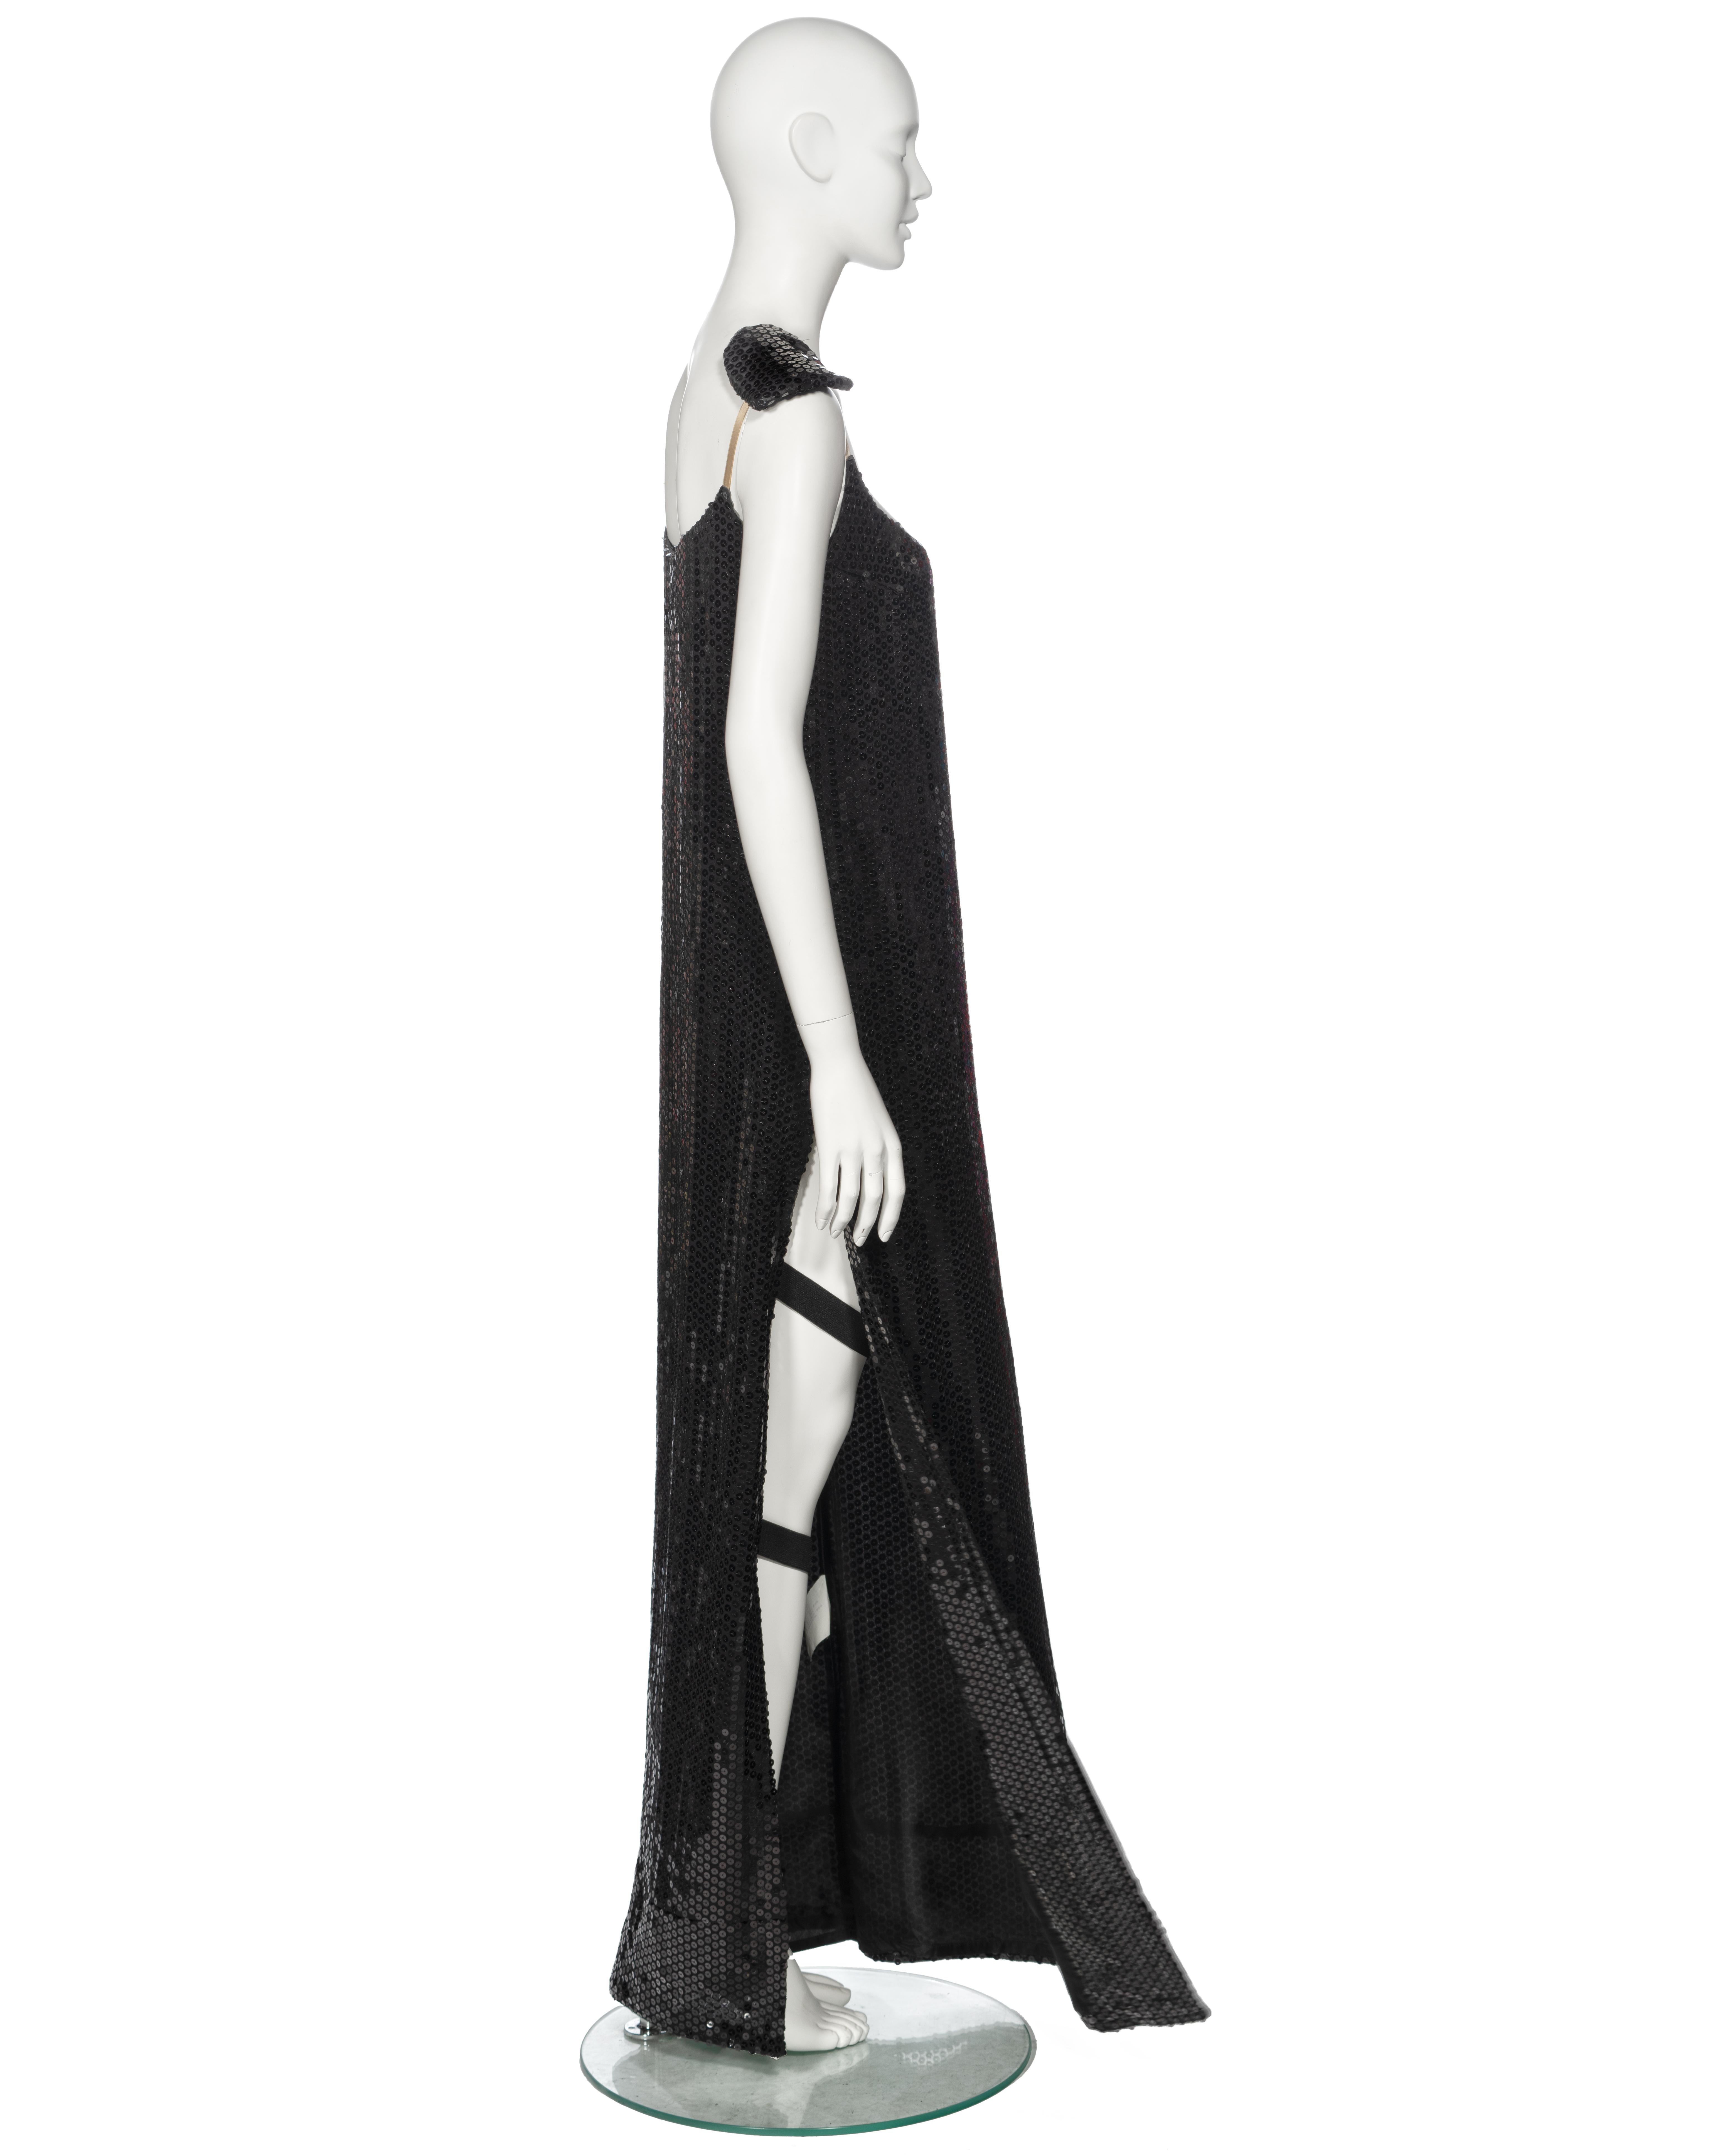 Helmut Lang Black Sequin Evening Dress With Armband, fw 1999 For Sale 9